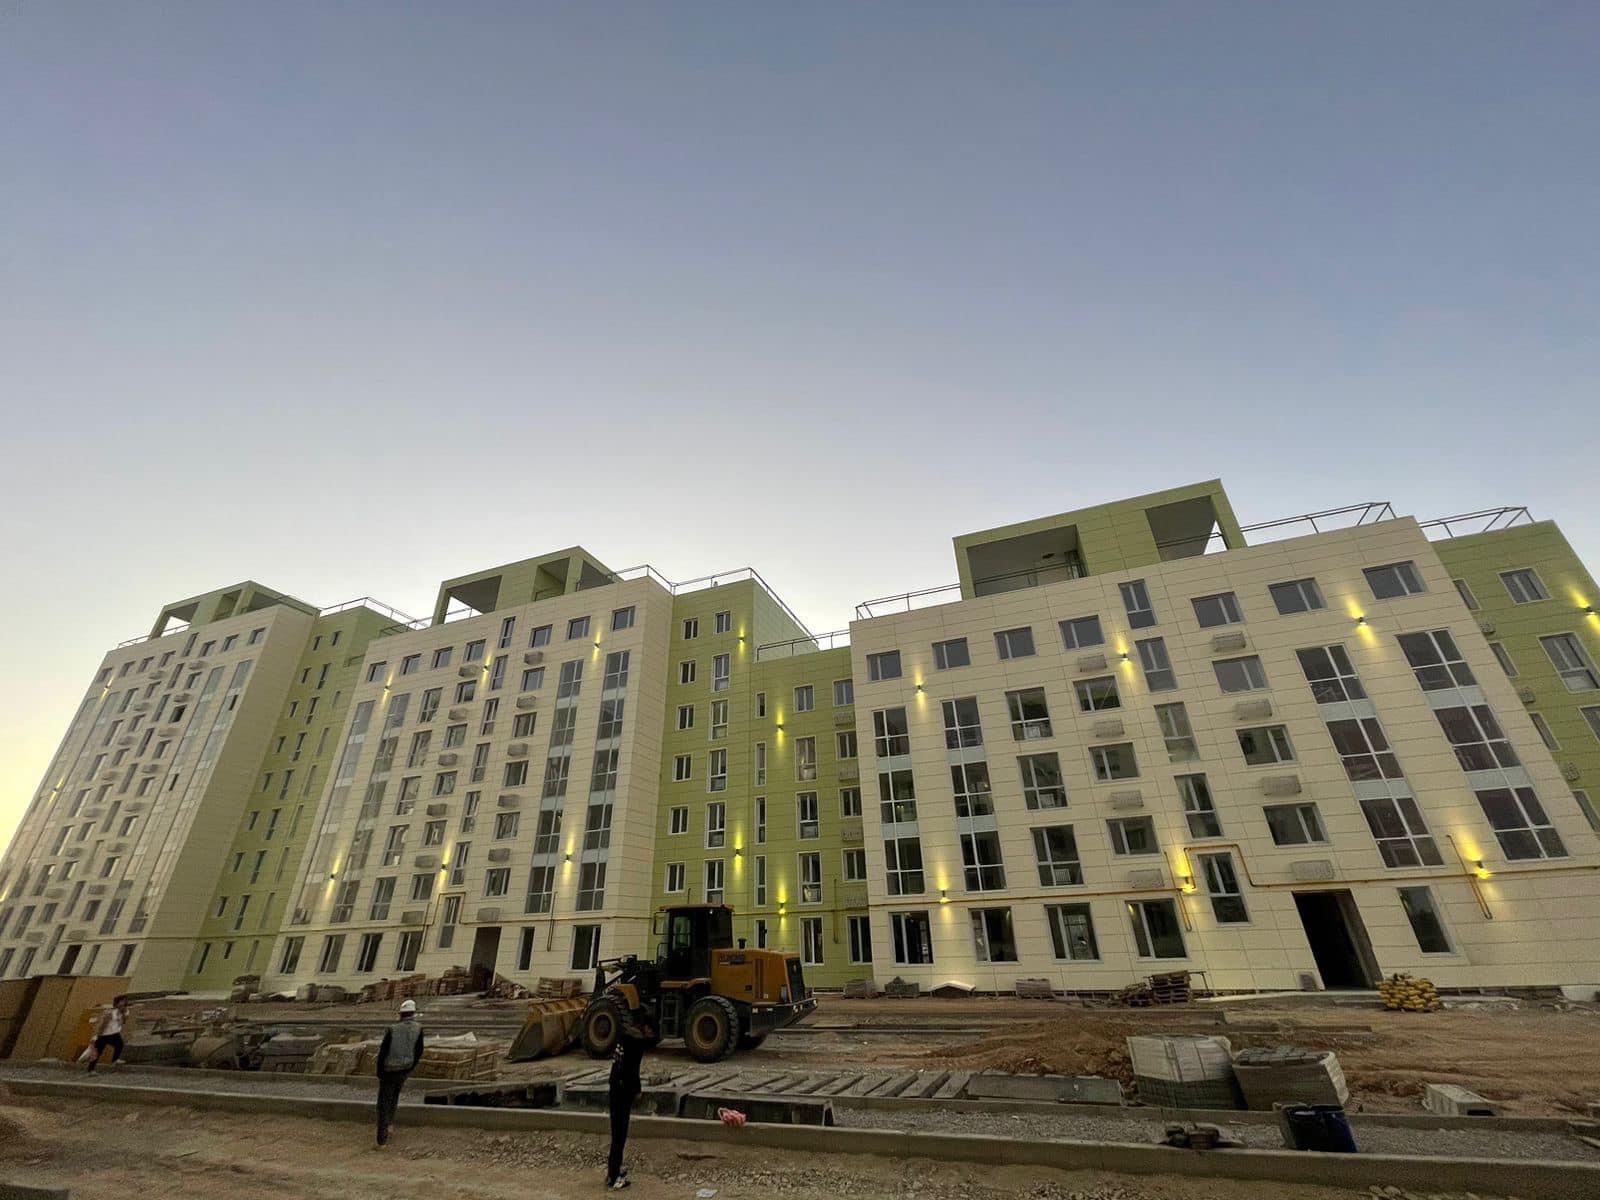 The object "Construction of 60 5, 7, 9, 12 and 20-storey residential buildings in the ADC of Turkestan (residential complex "Cascade"), block A, the customer of which is the Construction Department of the Turkestan region, will be put into operation in